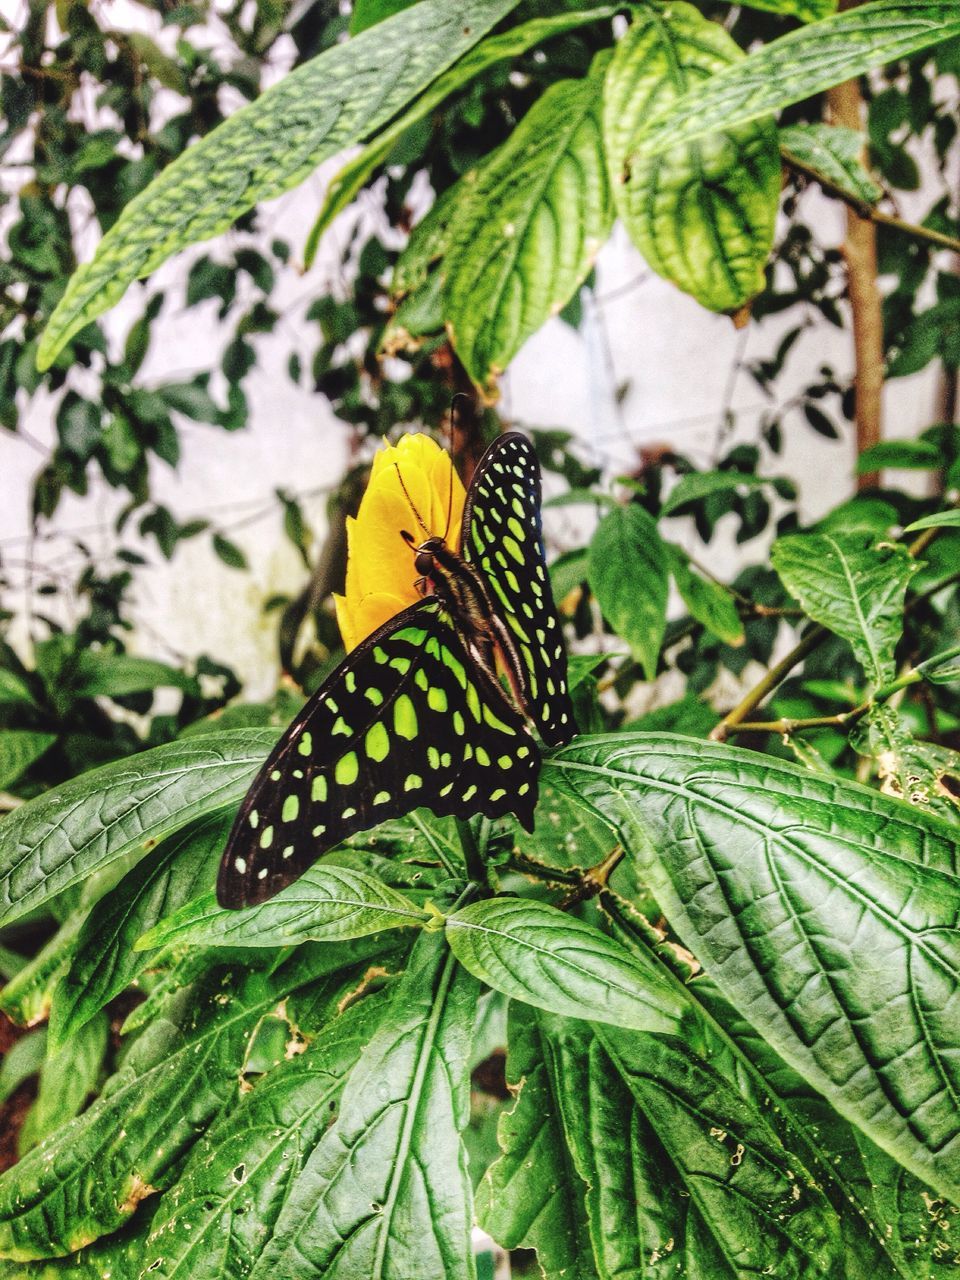 animals in the wild, one animal, animal themes, wildlife, insect, butterfly - insect, leaf, animal markings, butterfly, plant, green color, close-up, natural pattern, nature, beauty in nature, growth, focus on foreground, animal wing, outdoors, day